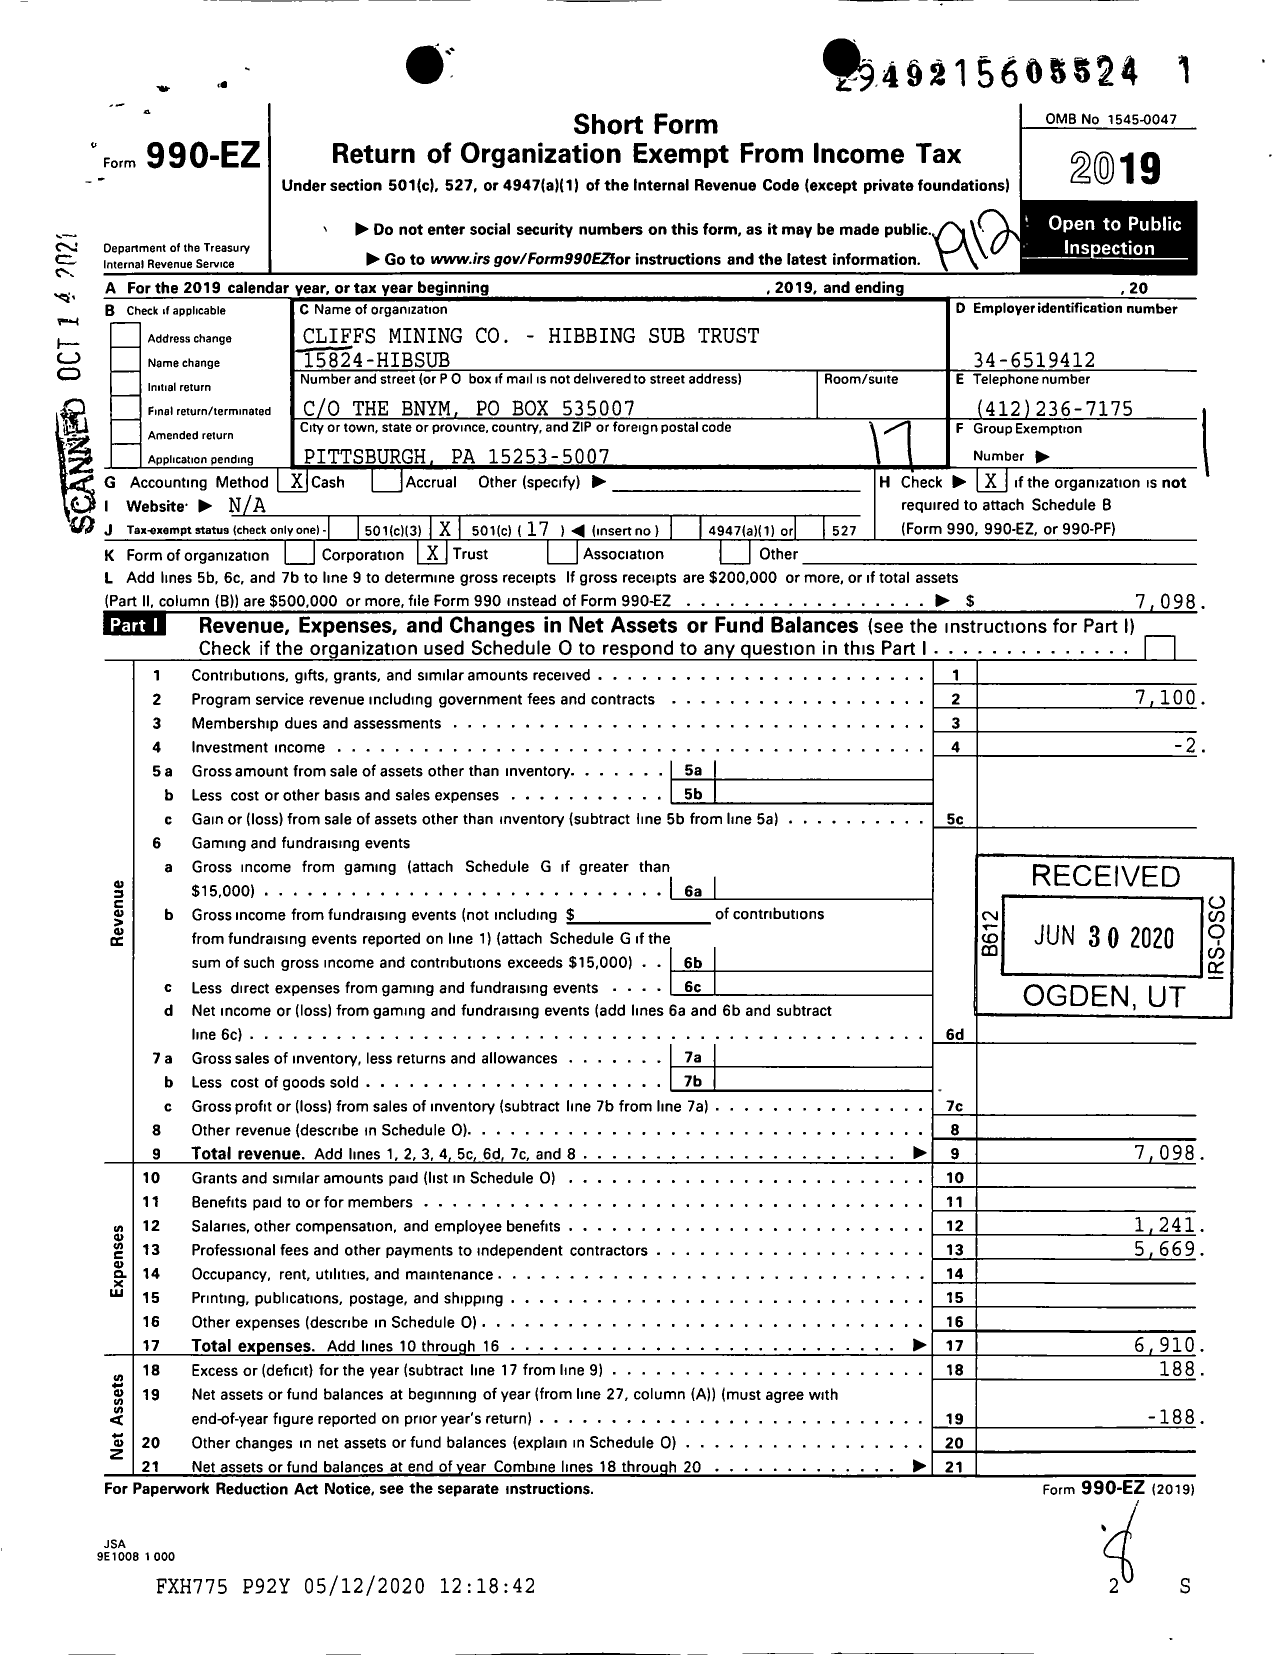 Image of first page of 2019 Form 990EO for Cliffs Mining Co - Hibbing Sub Trust 15824-HIBSUB